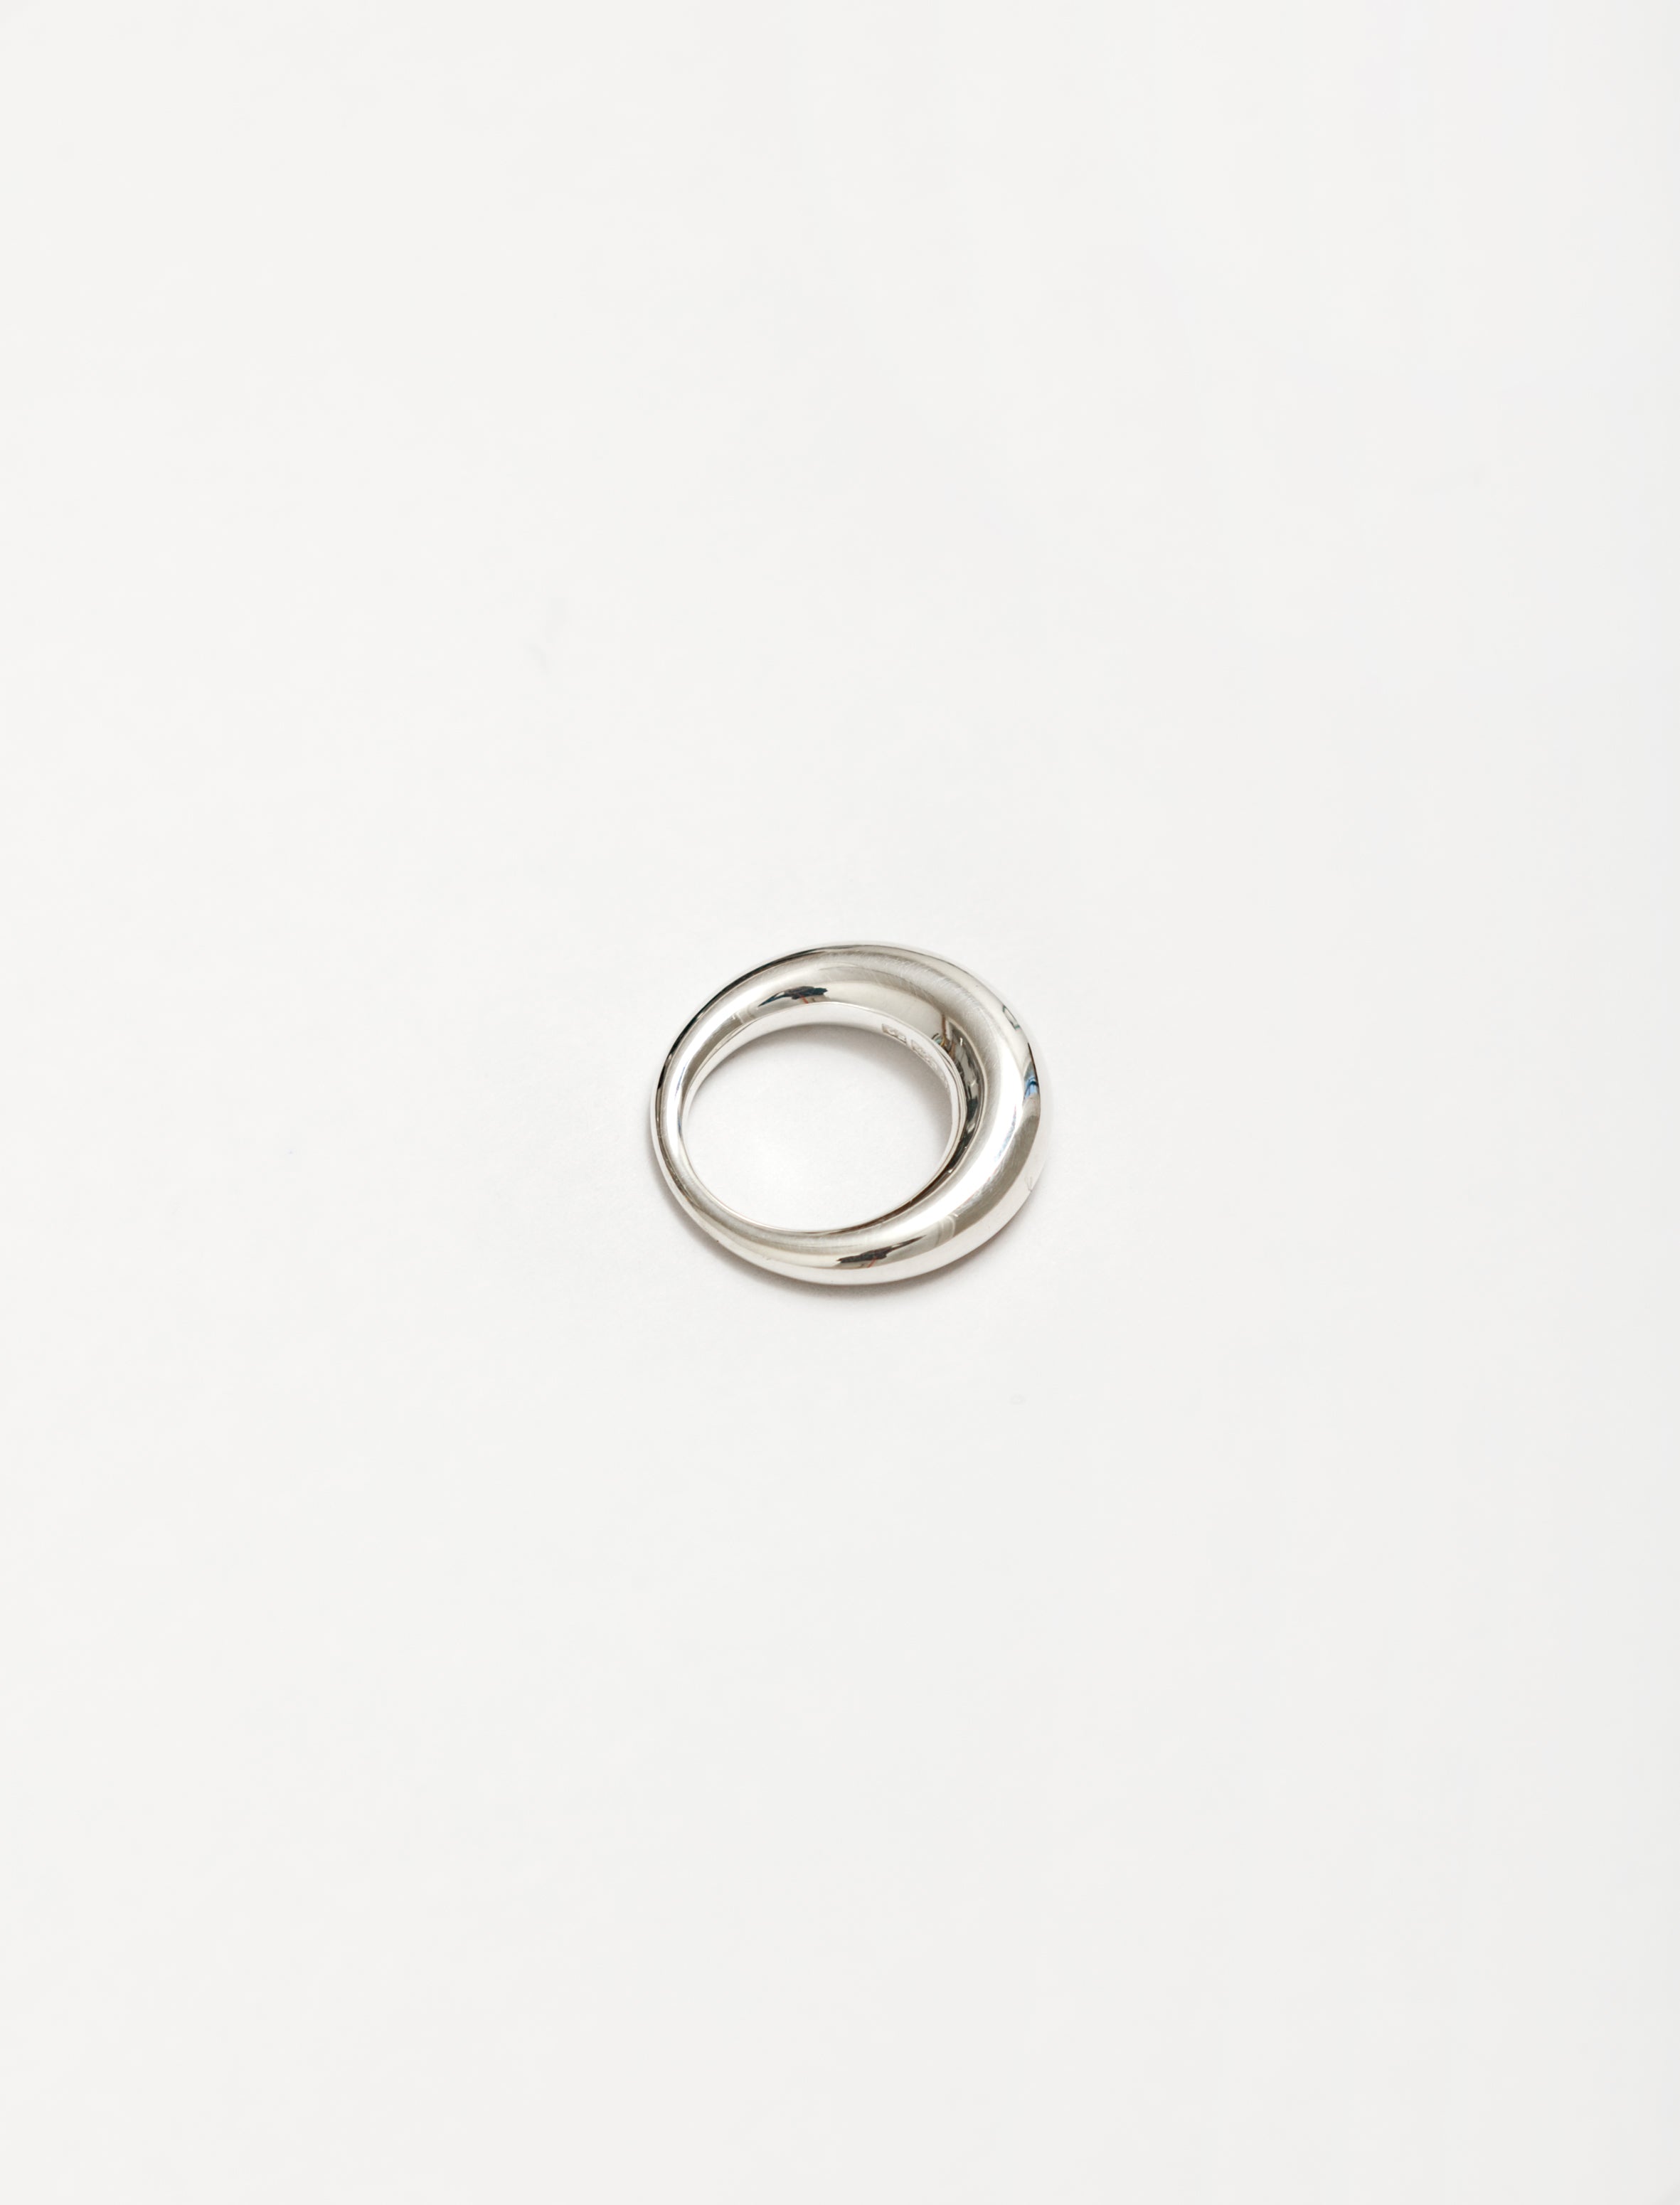 All Blues fat snake ring リング 11号-